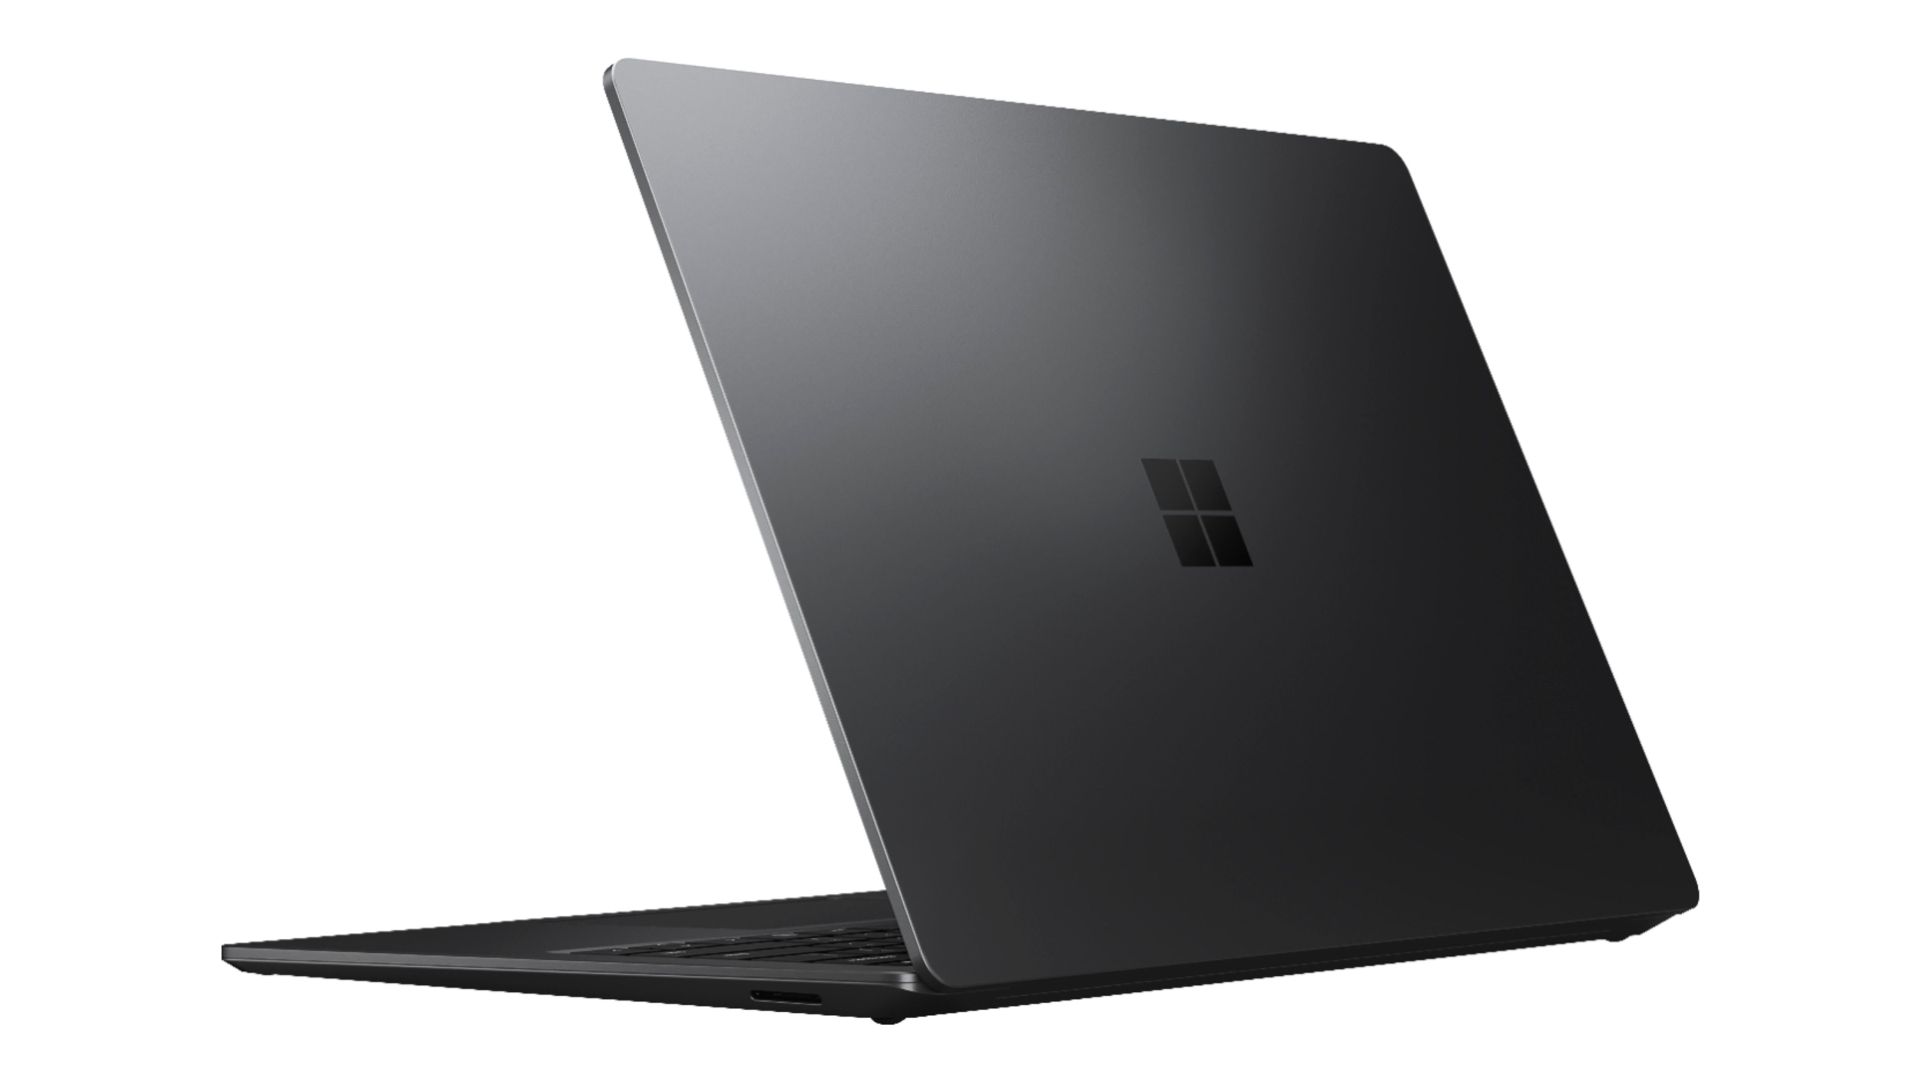 Microsoft Surface Pro 7 Surface Laptop 3 And Arm Powered Surface Are All Revealed In Leaked